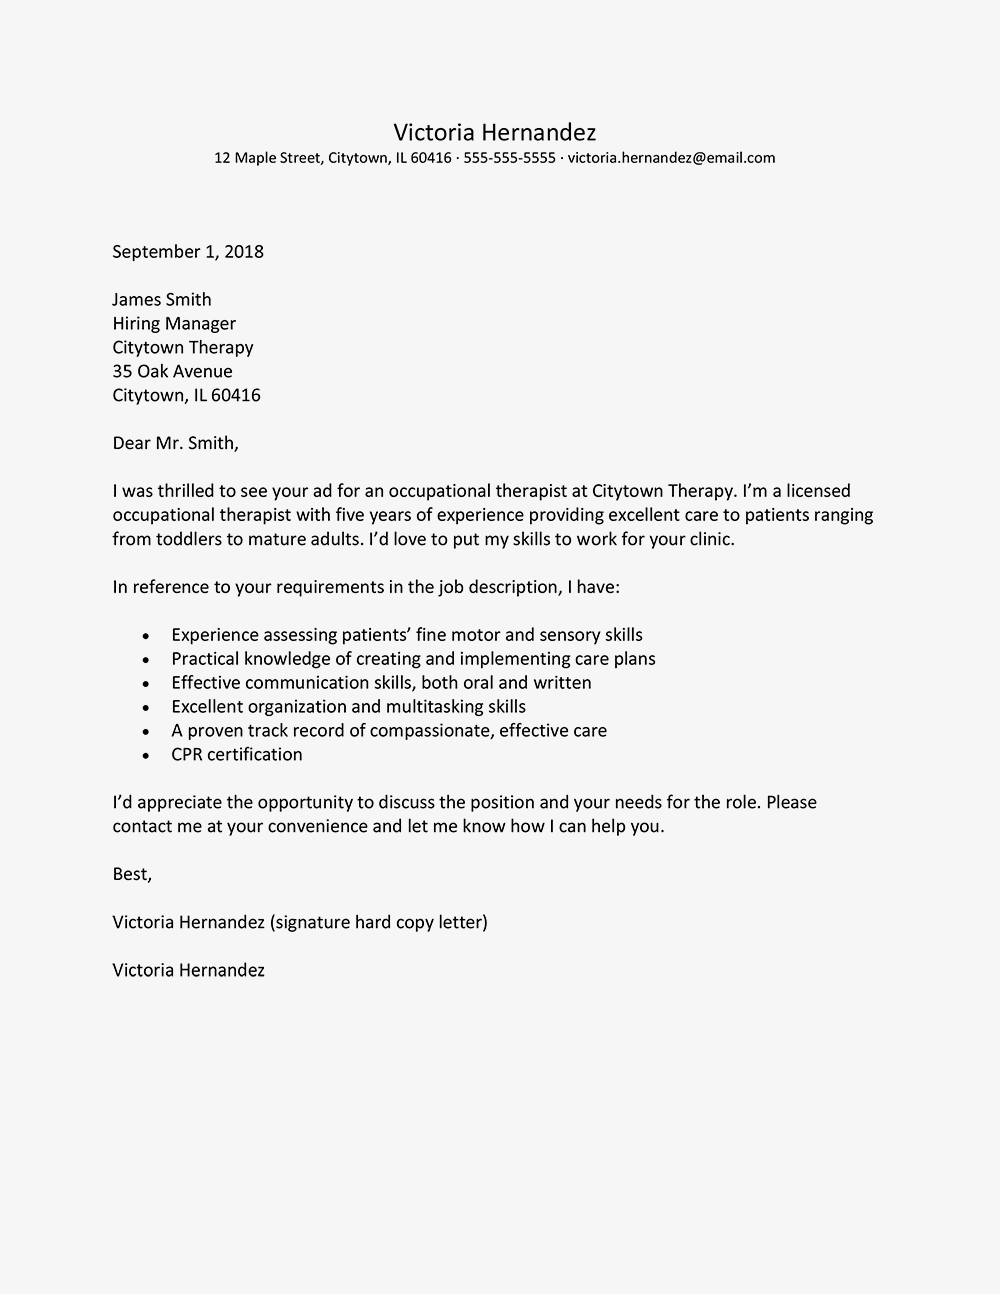 A Good Cover Letter Samples from mthomearts.com